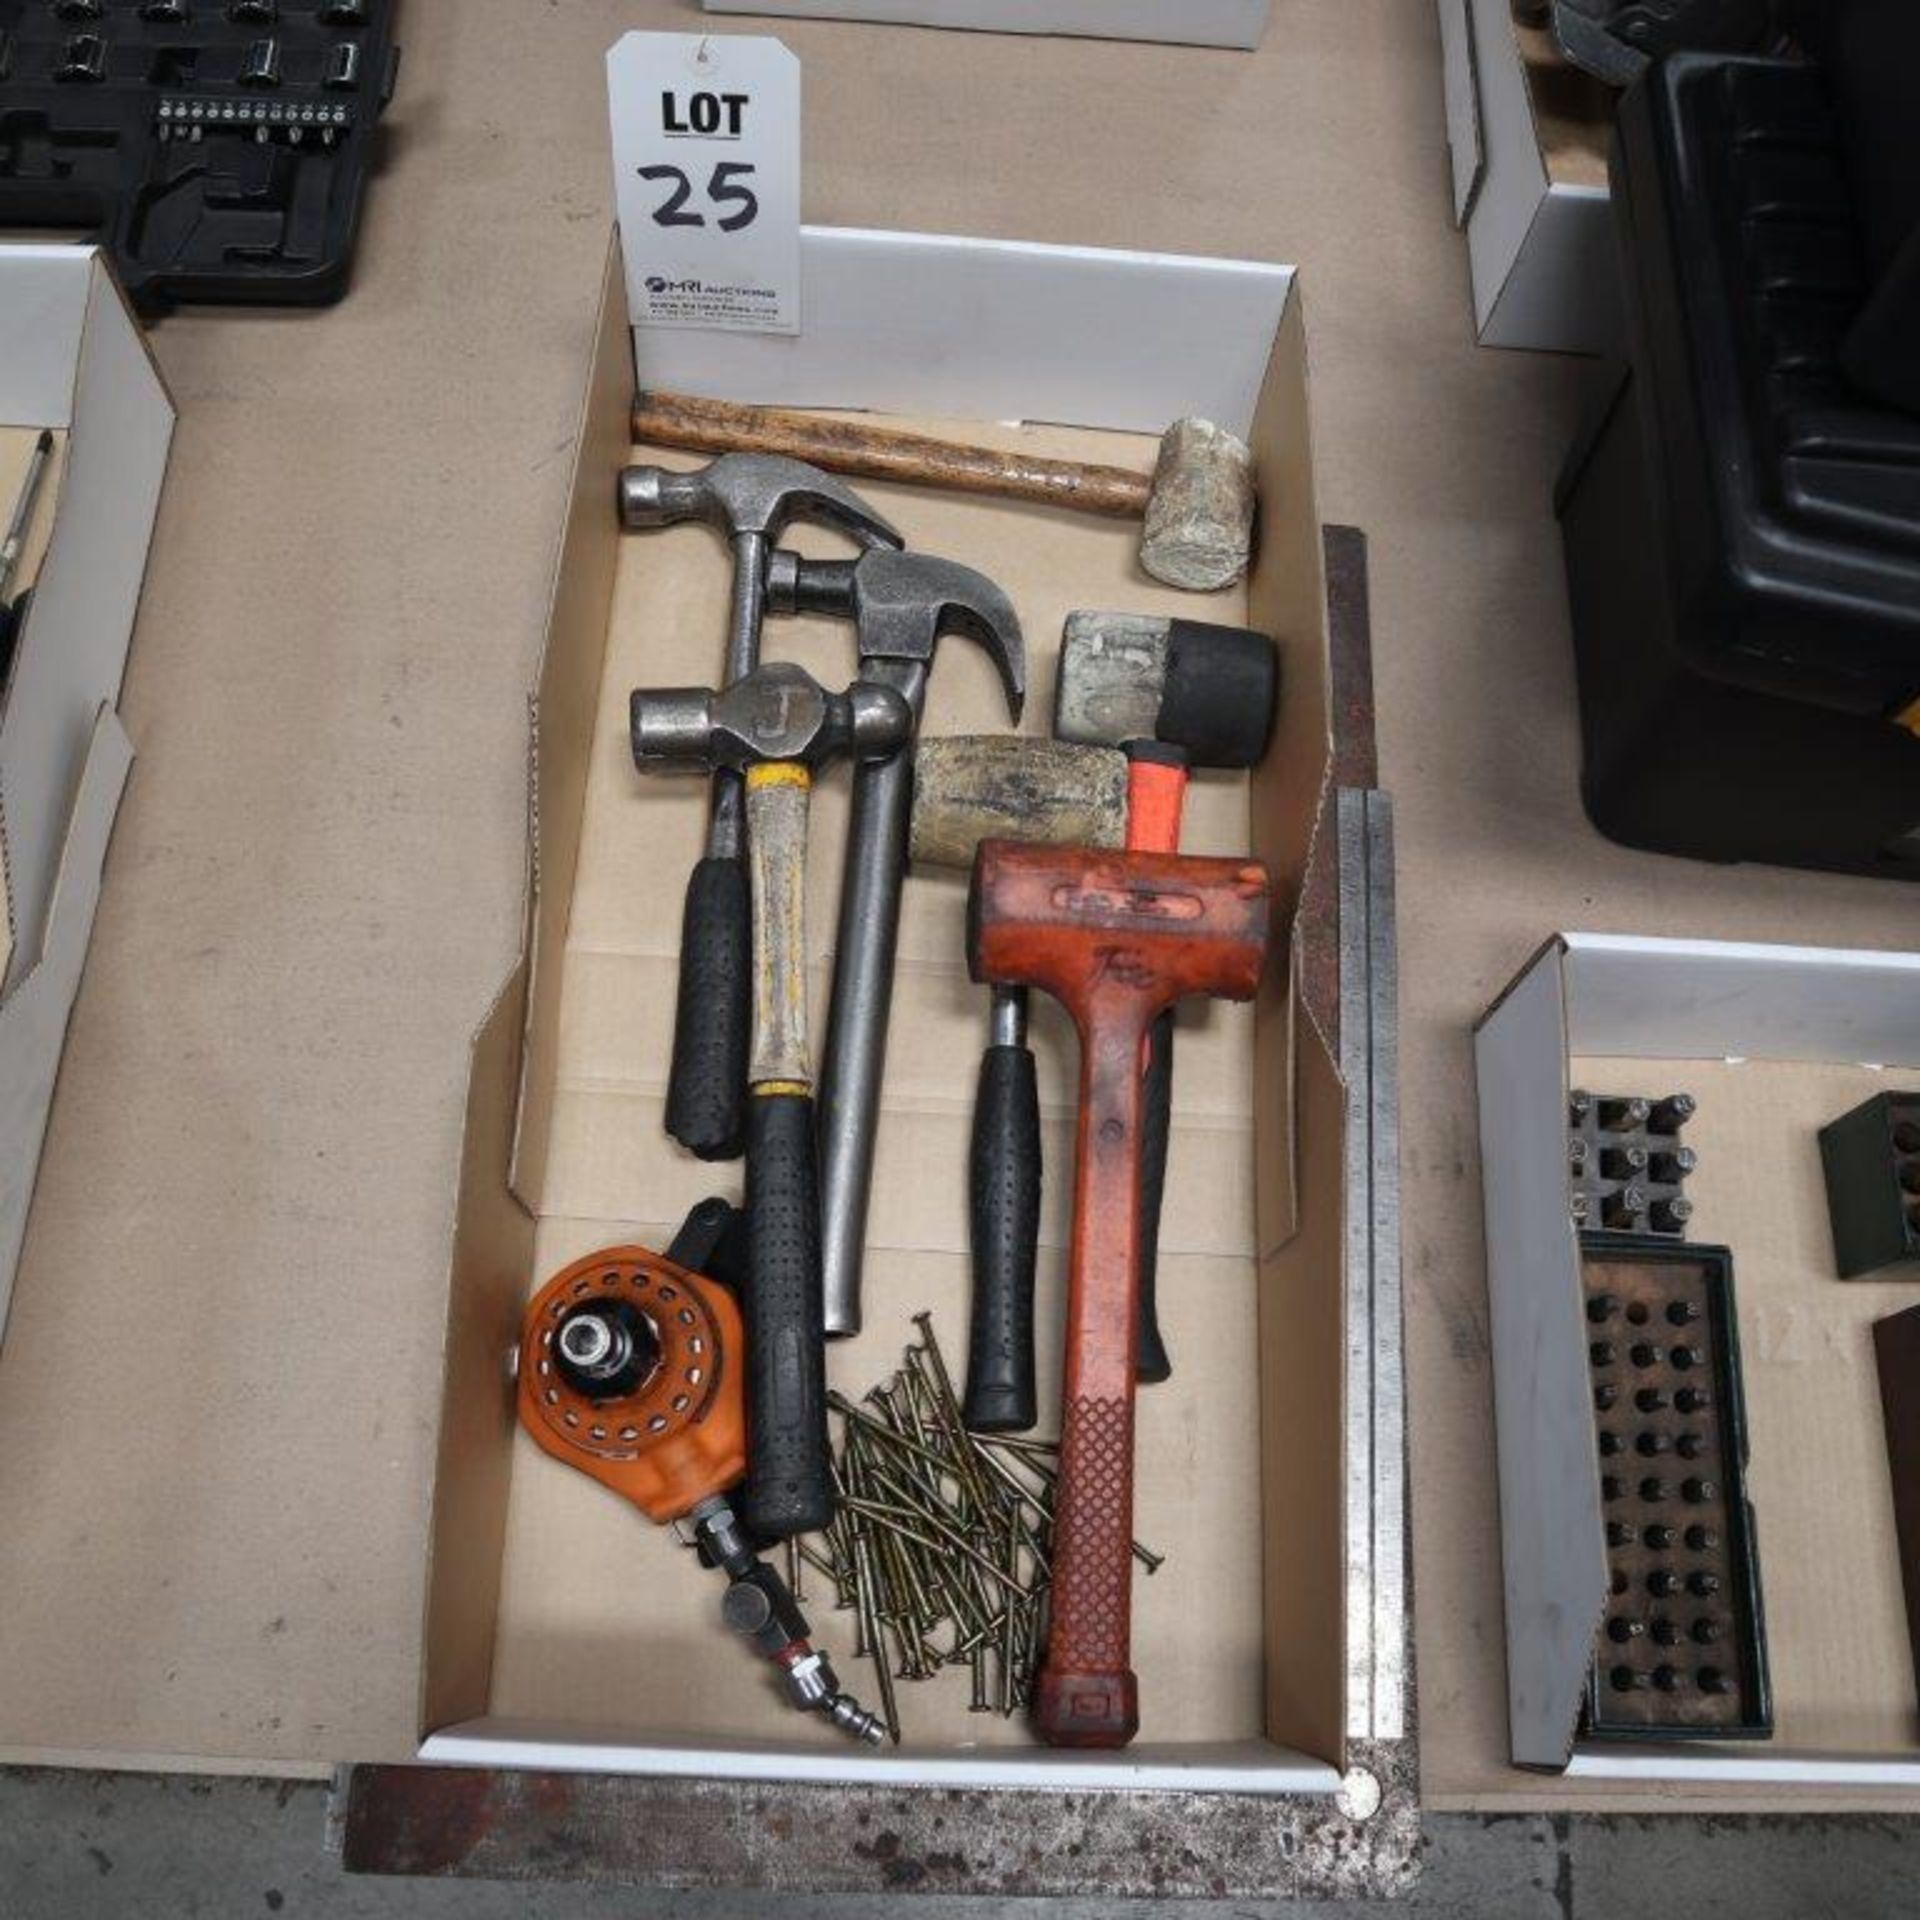 LOT TO INCLUDE: RIDGID PALM NAILER MODEL 2350PNF, CARPENTER HAMMERS, BALL PEEN HAMMERS, MALLETS, AND - Image 2 of 3